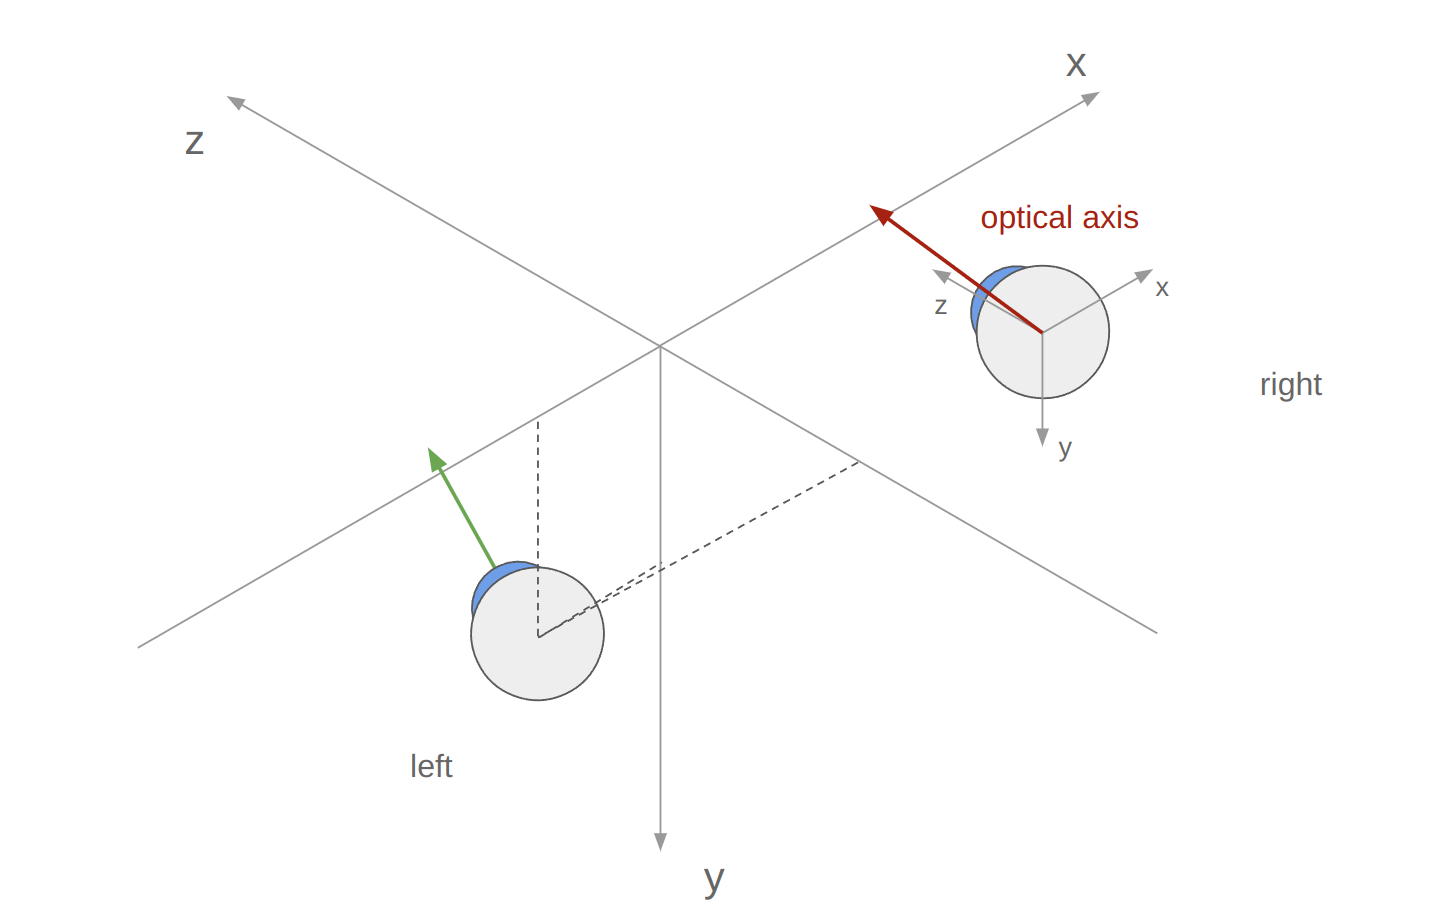 Coordinate systems of 3D eye states